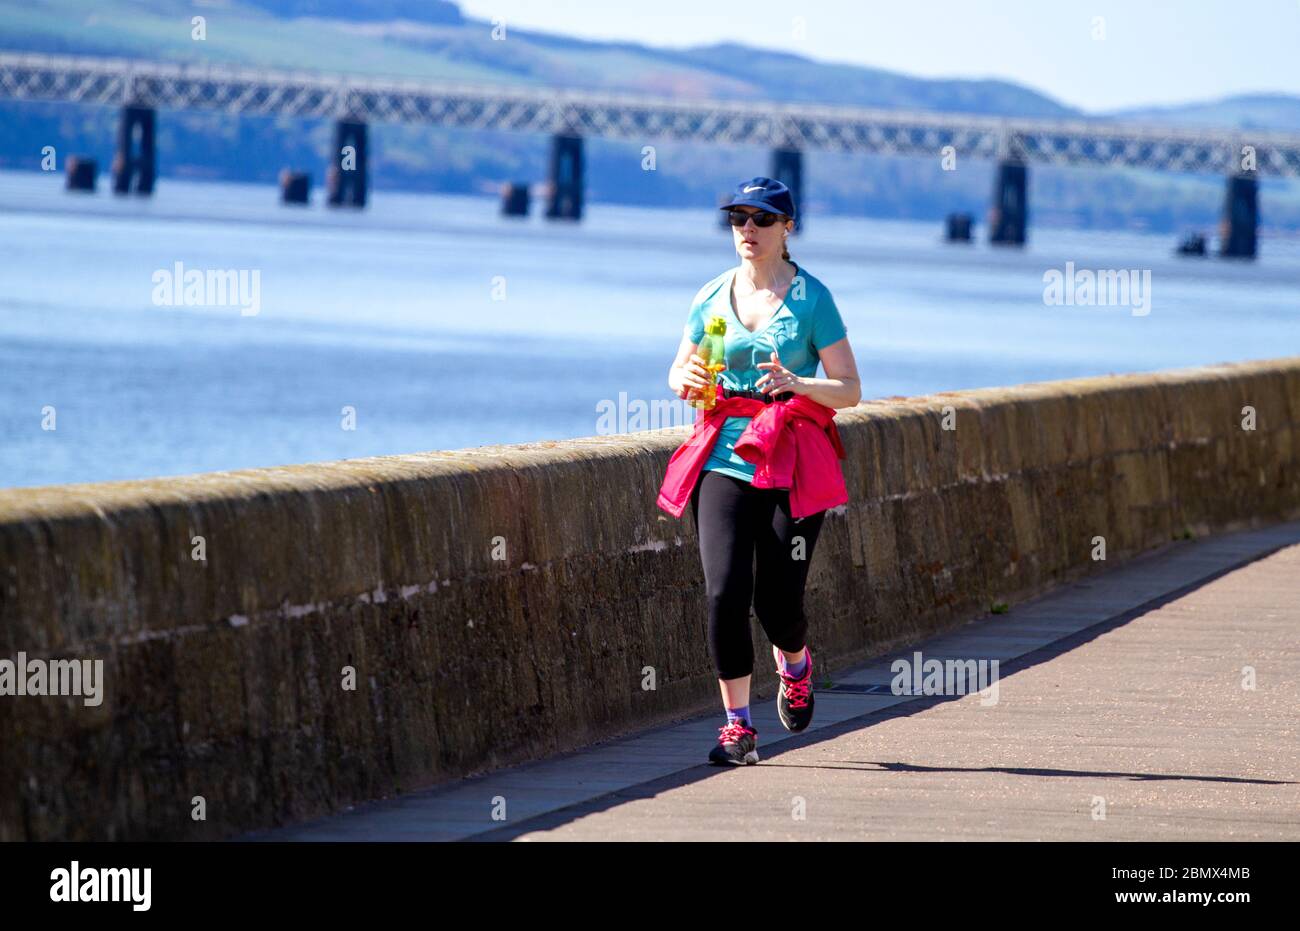 Dundee, Tayside, Scotland, UK. 11th May, 2020. UK Weather: A cooler day with sunshine in Dundee Scotland with maximum temperature 12°C. Local residents enjoying the weather while taking light outdoor exercises jogging along the riverside promenade during the Covid-19 lockdown restrictions. Credit: Dundee Photographics/Alamy Live News Stock Photo